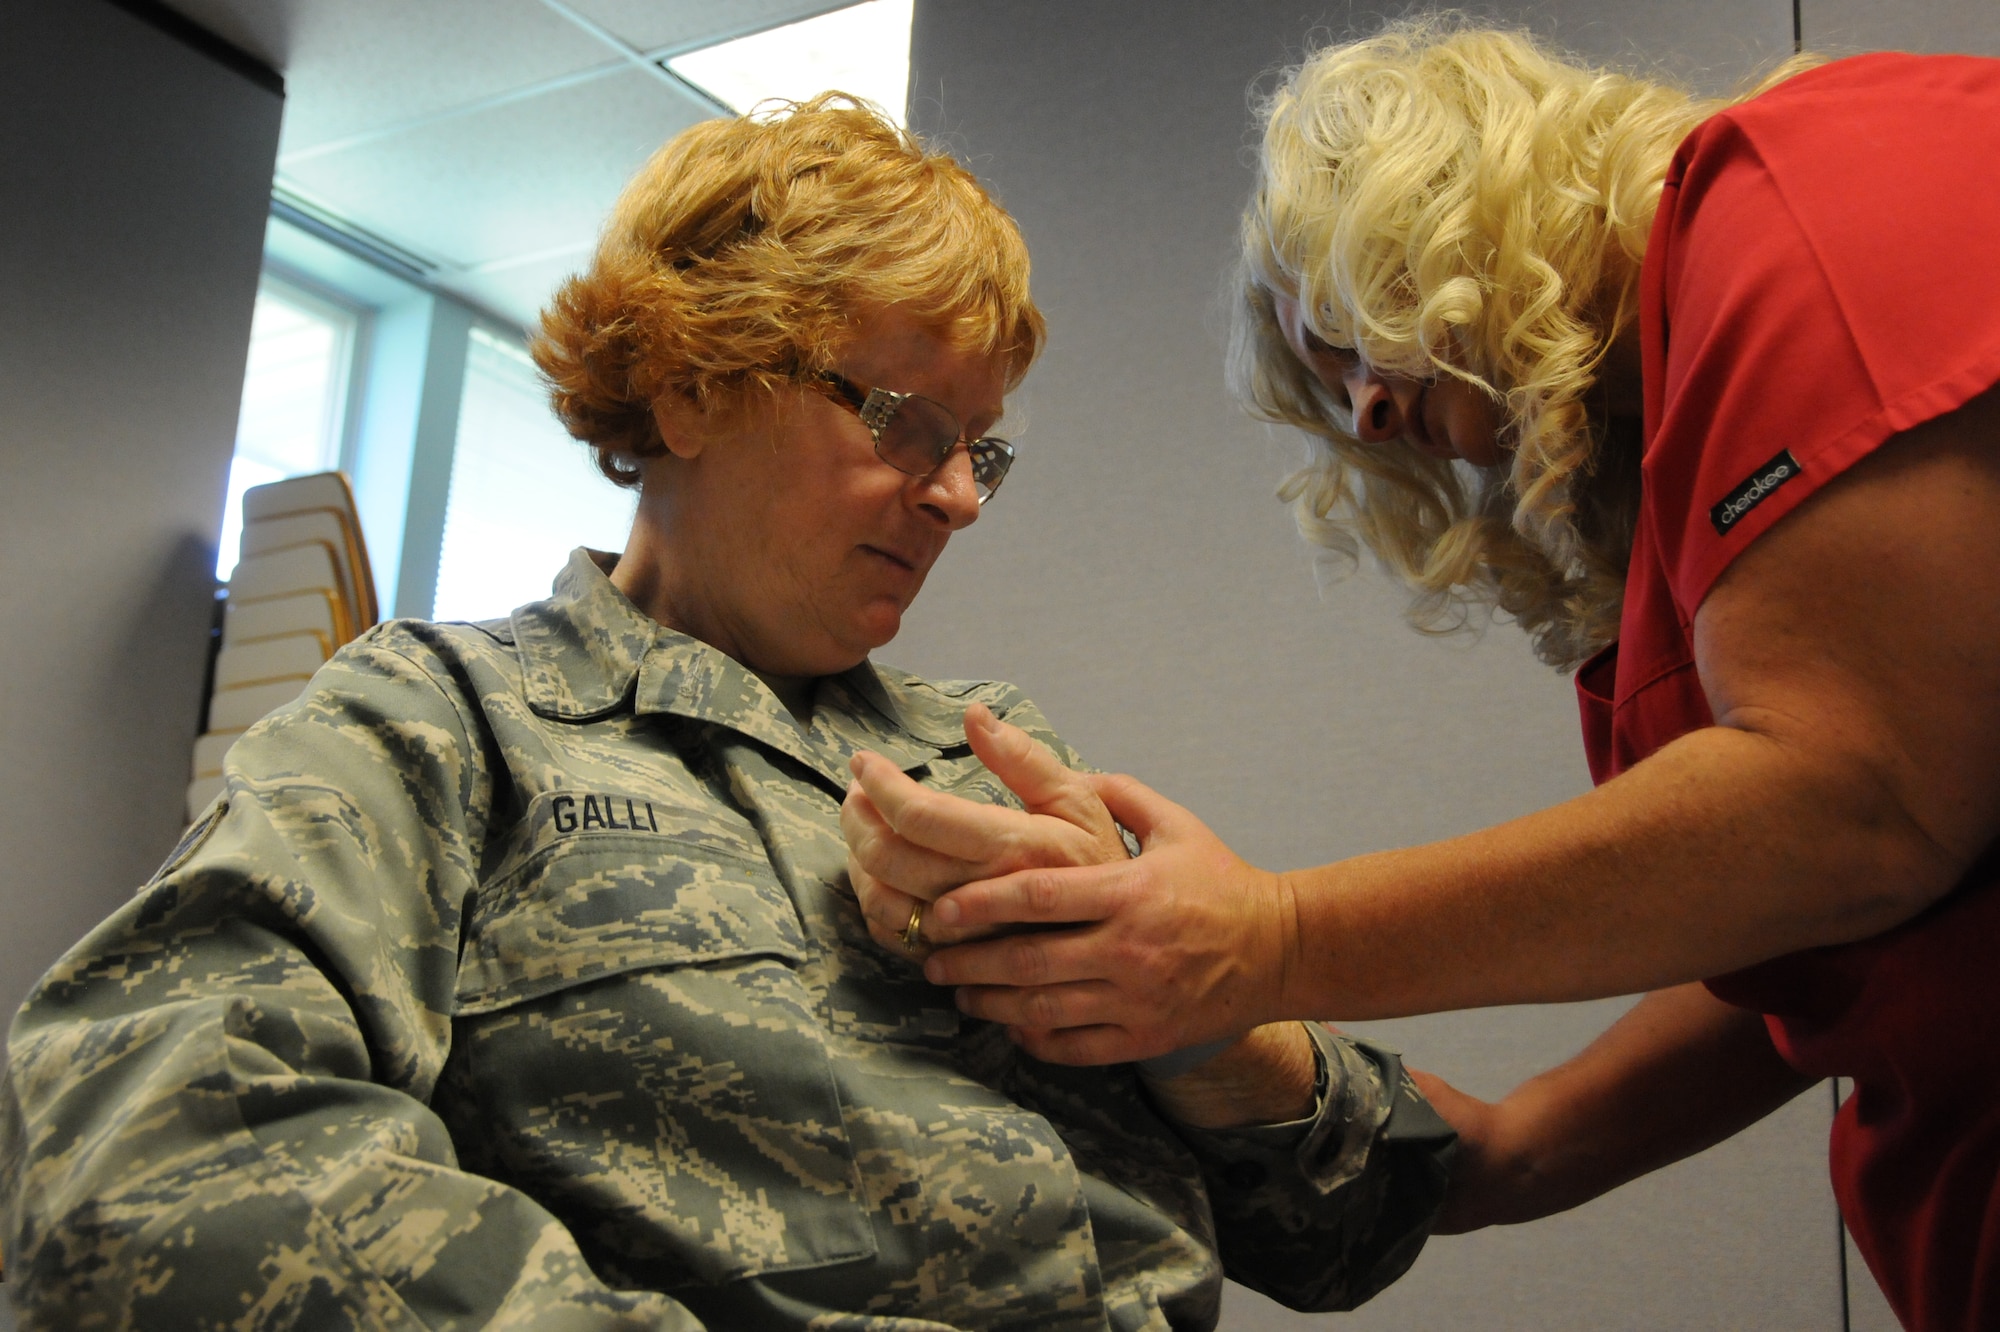 Staff Sgt. Doris Galli, 102nd Force Support Flight cook, watches as Shelley Fleetwood, Logistics Health team lead, checks her blood pressure prior to a dental exam at the 102nd Medical Group building on Otis Air National Guard Base, Mass. Oct. 13. Galli was one of approximately 120 servicemembers who received complimentary dental treatment from Logistics Health dental professionals thorughout the weekend. (National Guard photo by Senior Airman Patrick McKenna/Released)